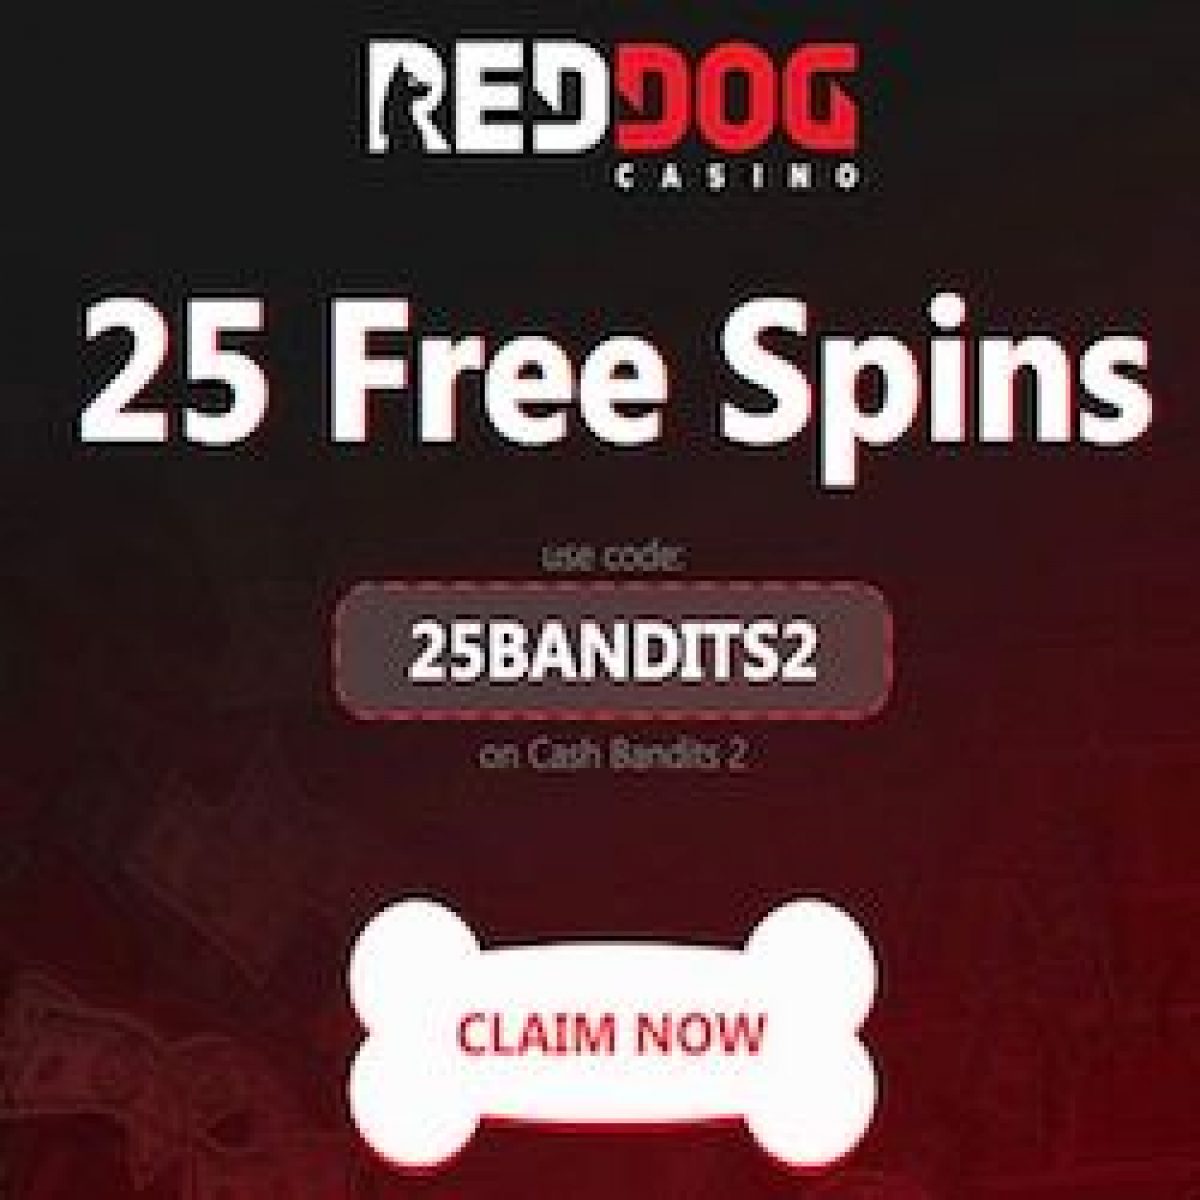 Reviews On Red Dog Casino